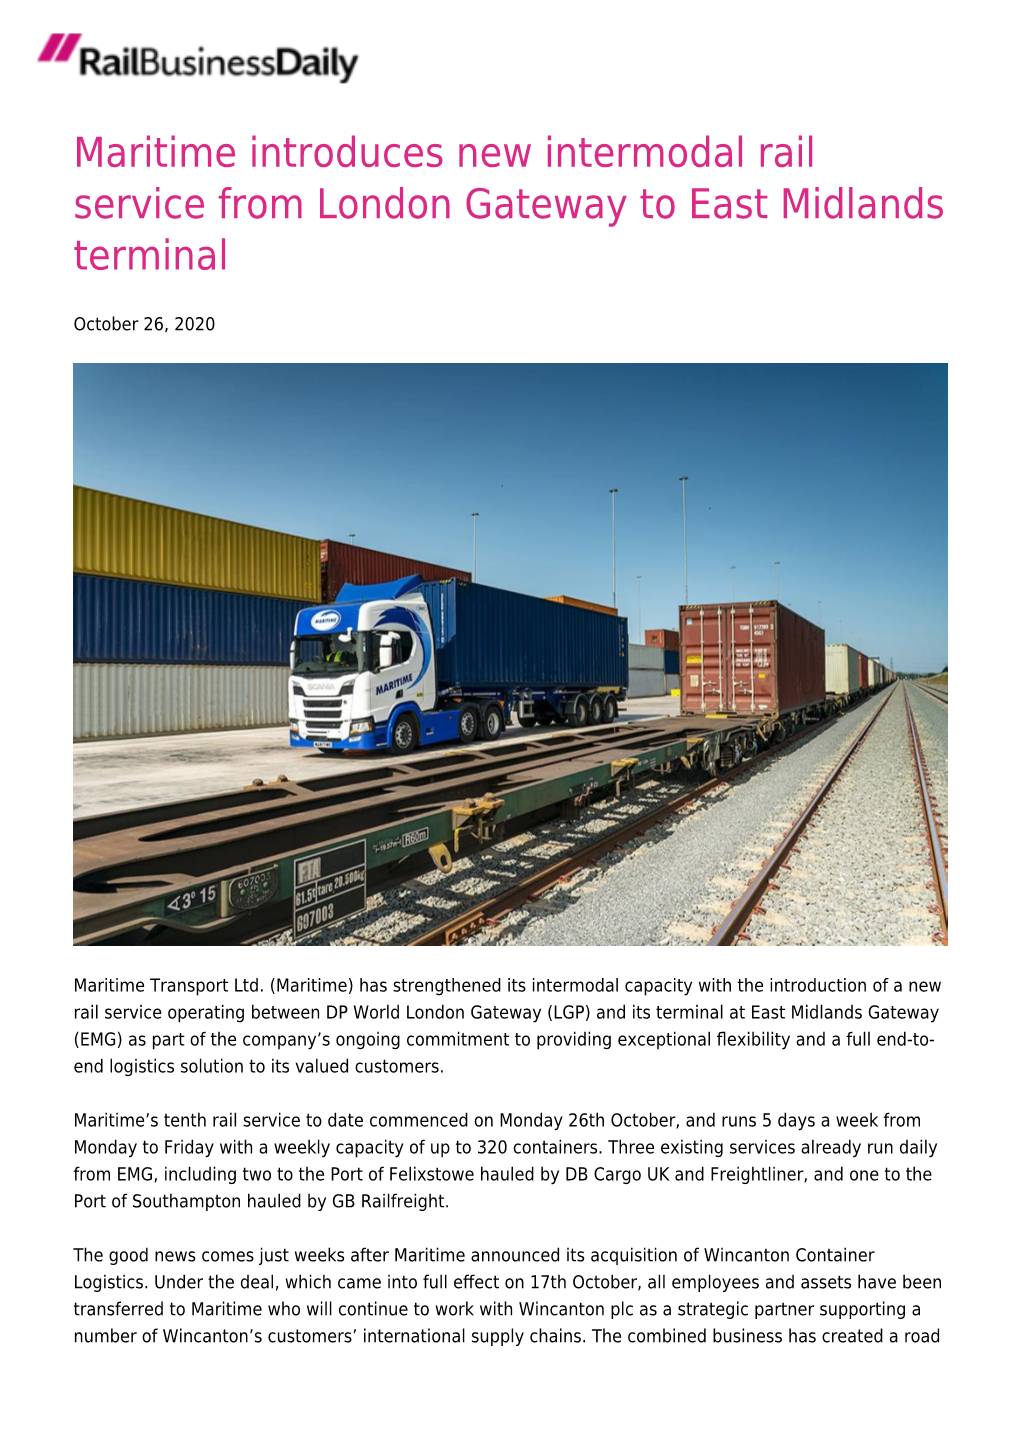 Maritime Introduces New Intermodal Rail Service from London Gateway to East Midlands Terminal